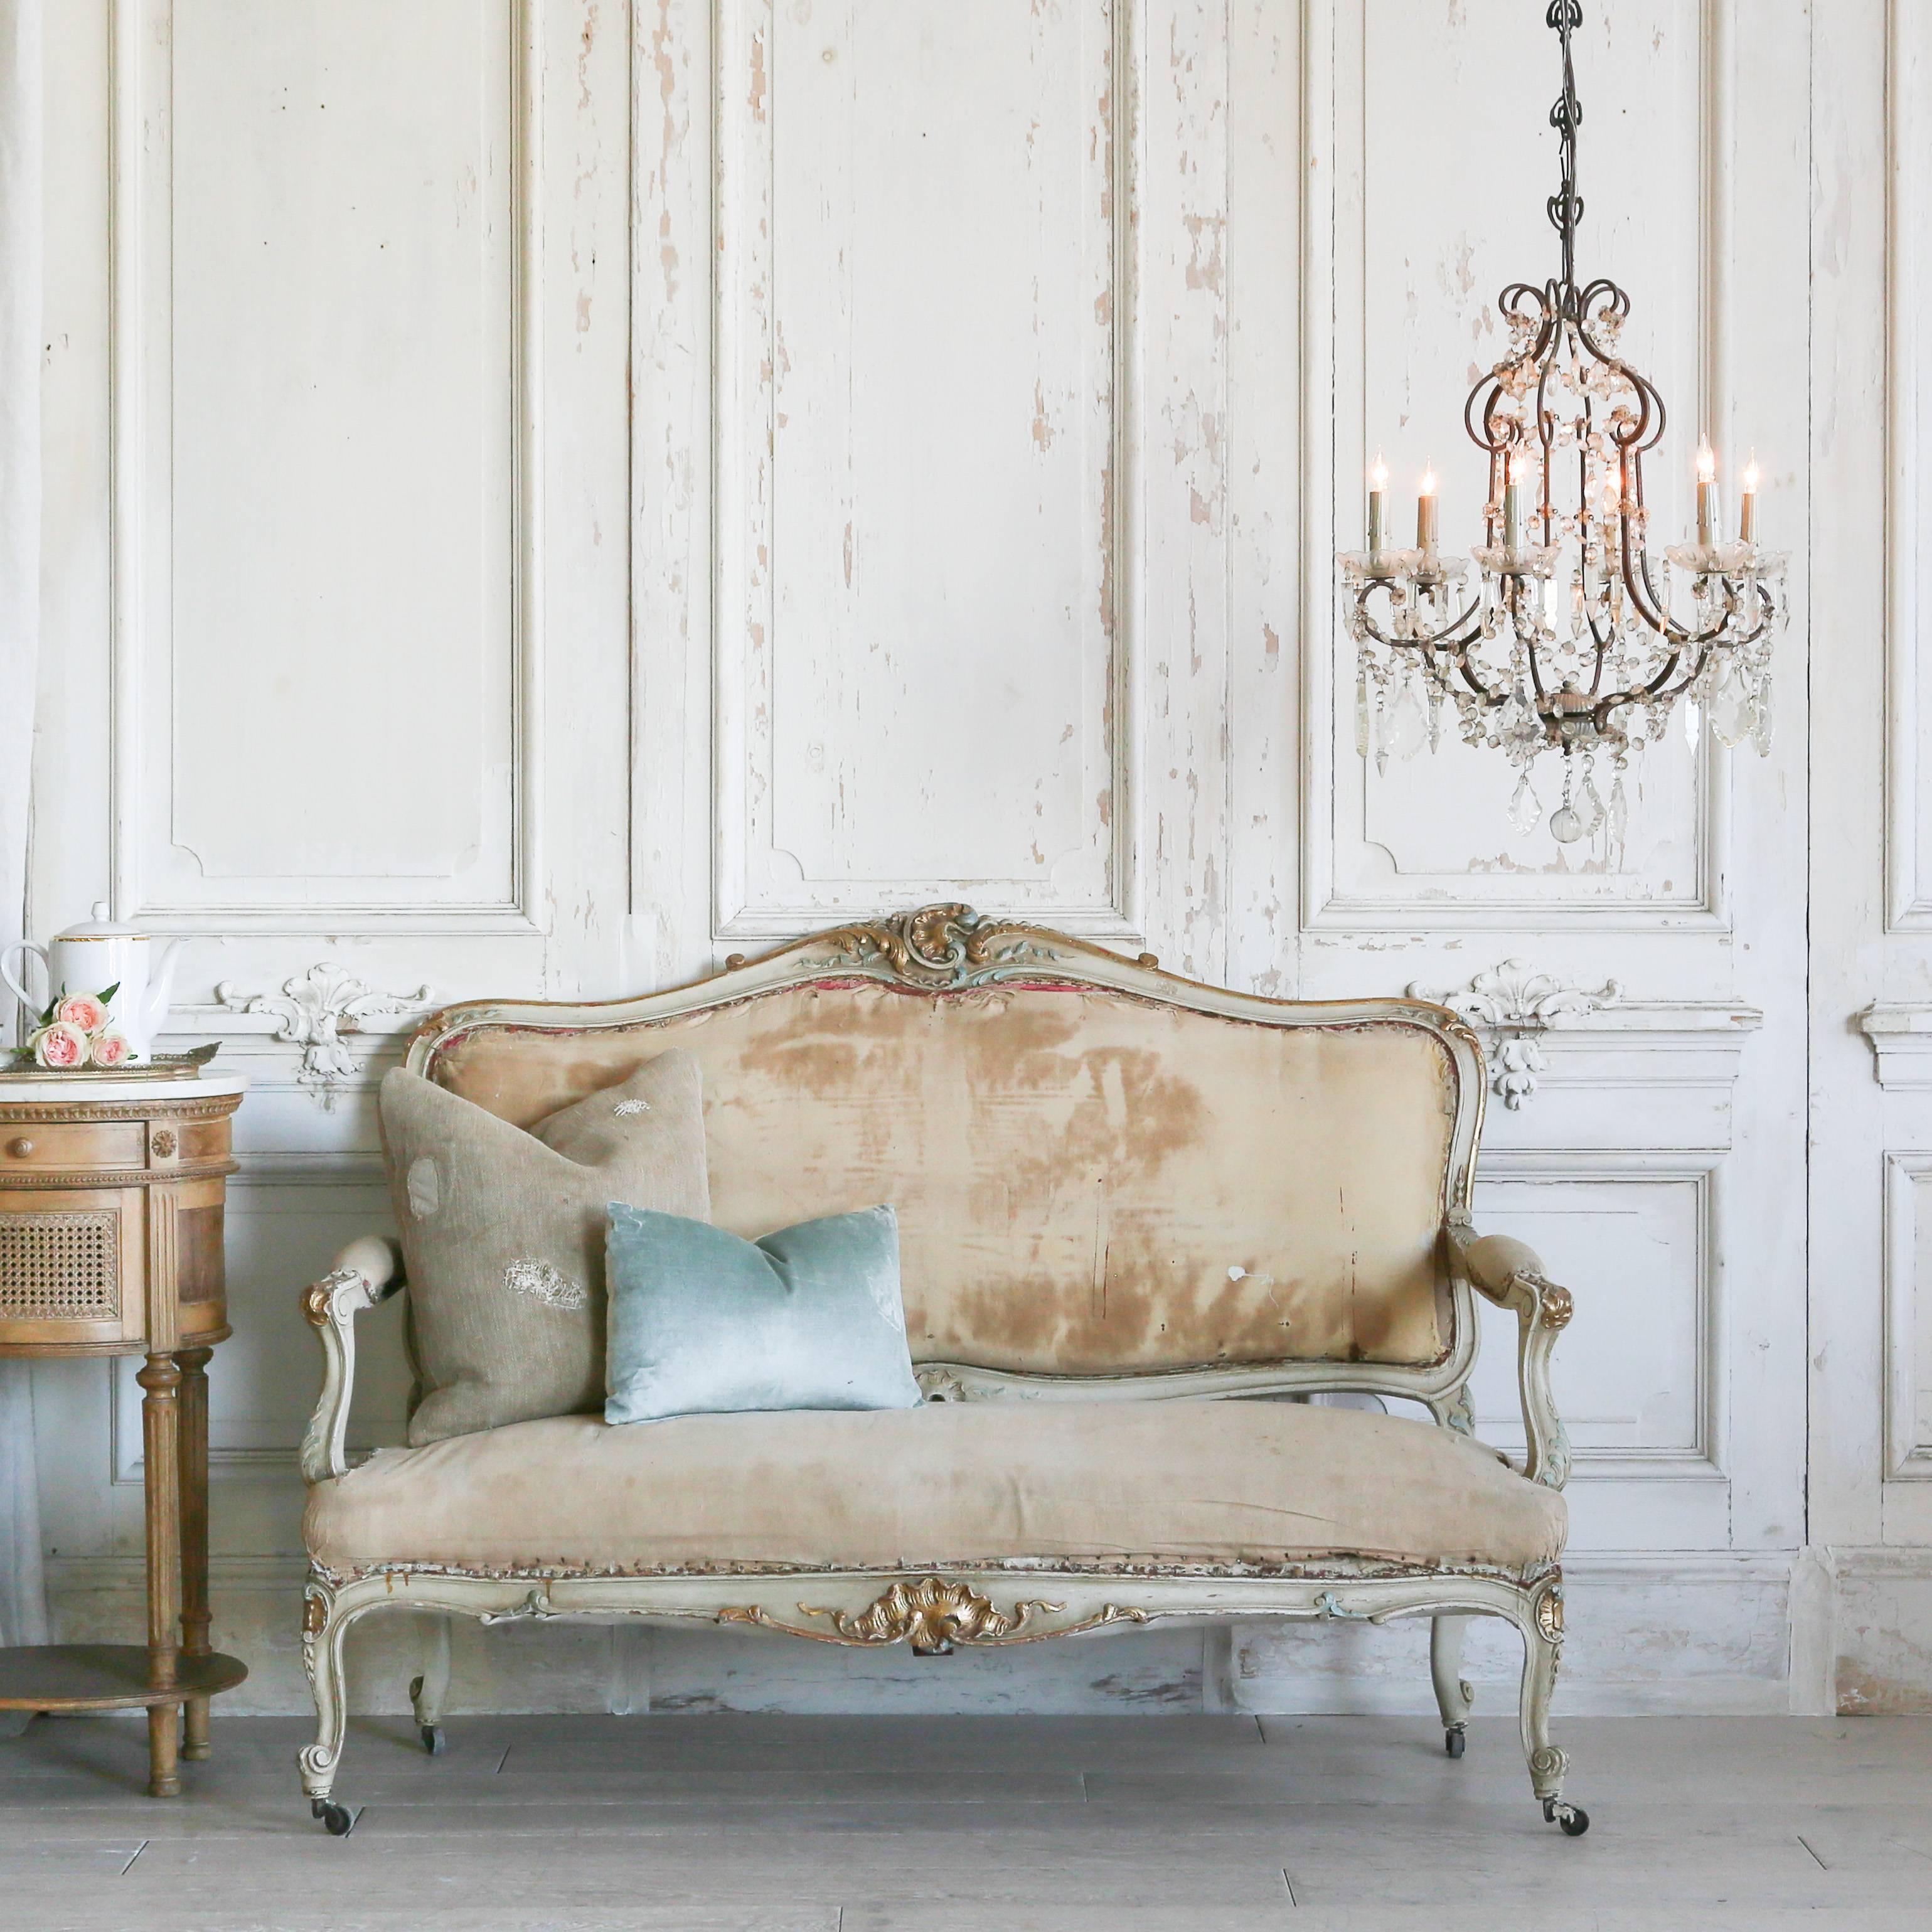 Darling antique settee in distressed bone, gilt, and turquoise tones. This sweet love seat has a prominent crest with swirl and ocean motifs that gleam golden against the blue and neutral paint. The classic Louis XV legs sit atop small rollers.